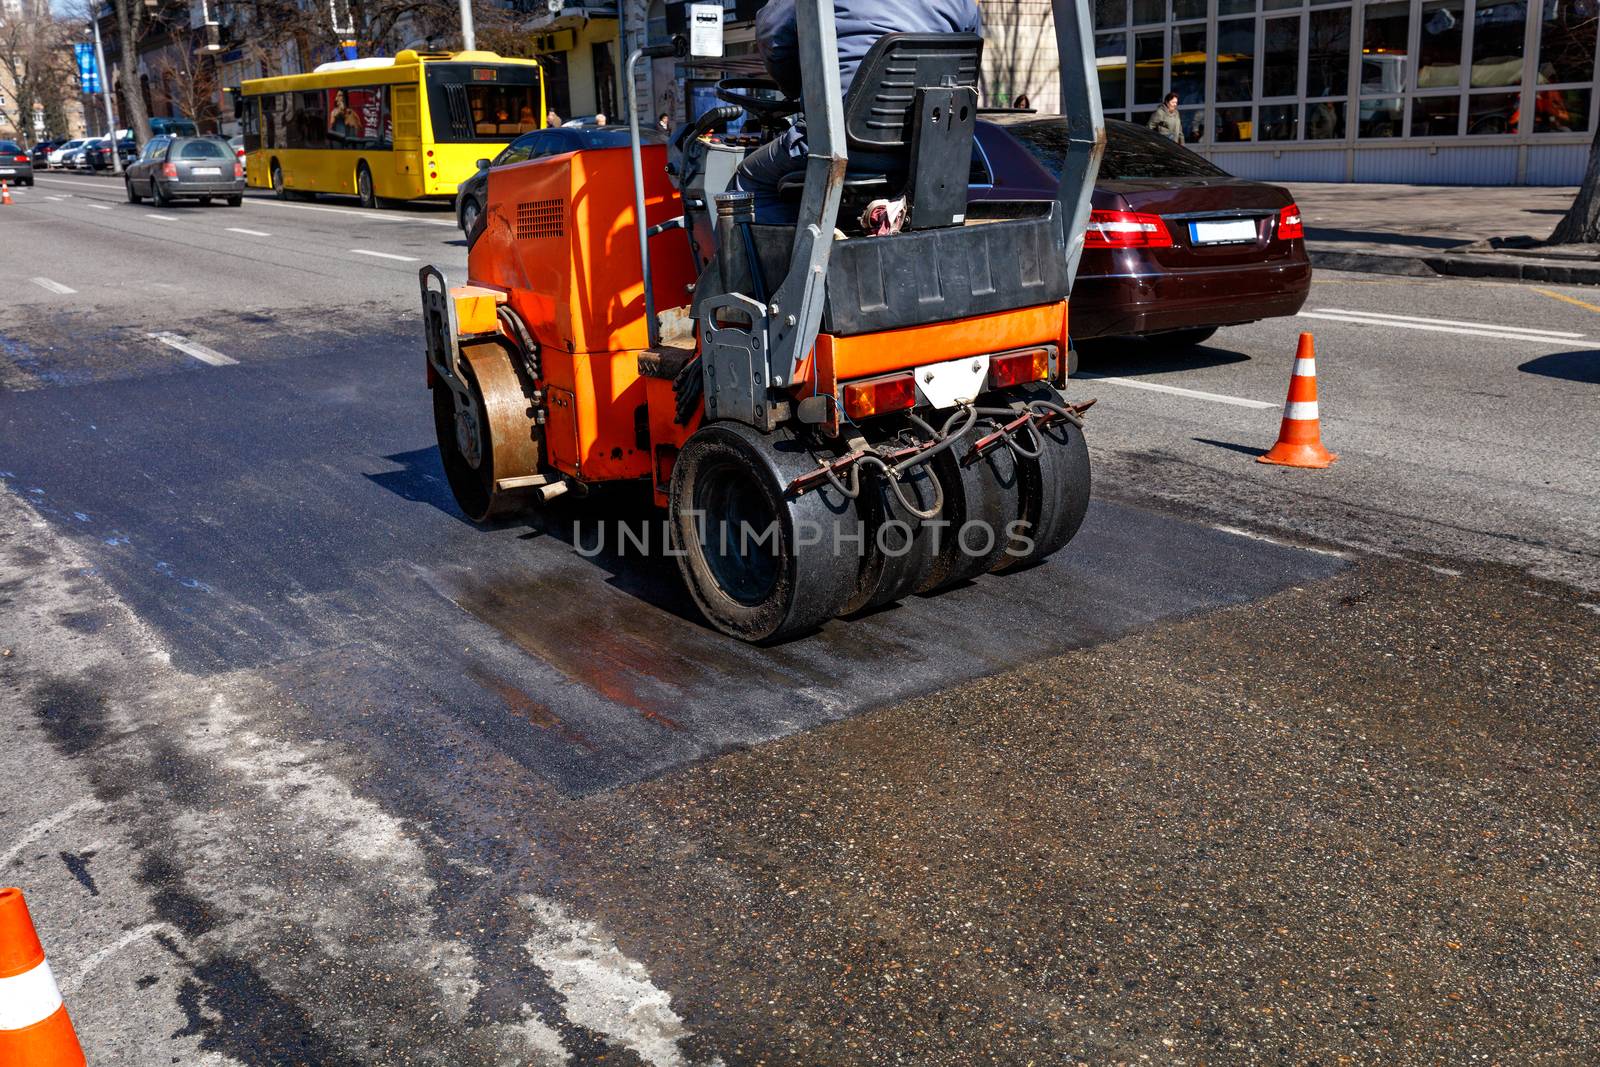 A heavy orange vibratory roller compacts and levels a section of road on a city street fenced with traffic cones, image with copy space.